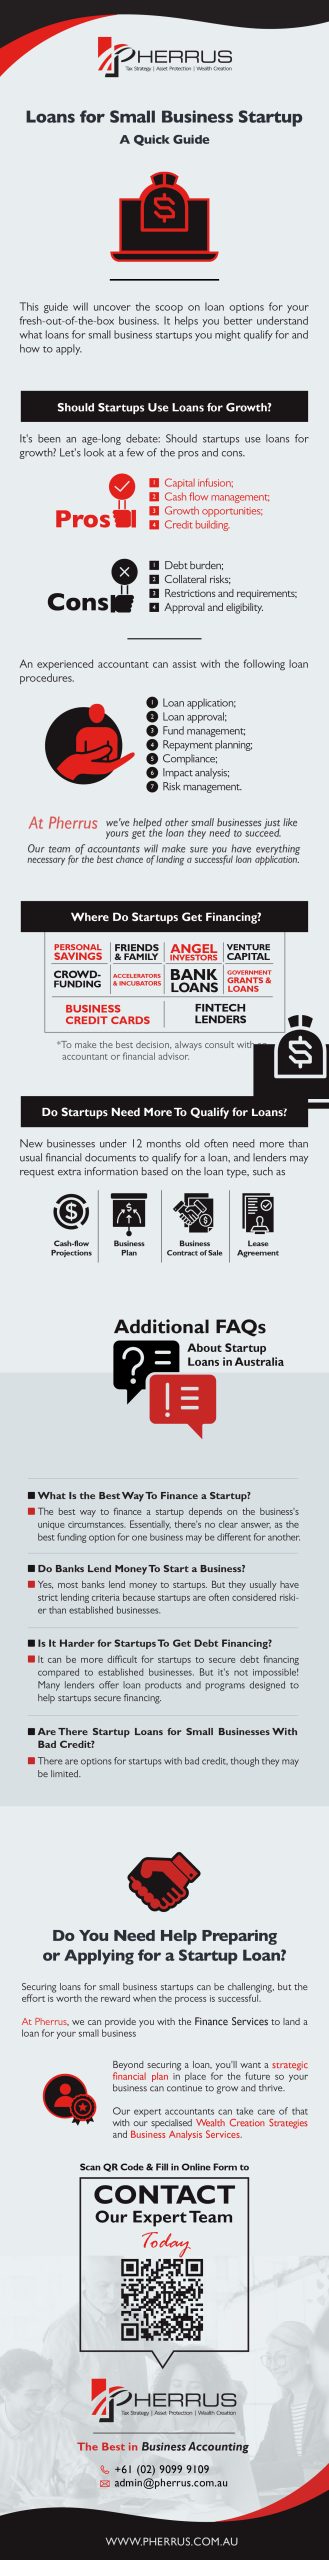 Loans for Small Business Startups - A Quick Guide Infographic